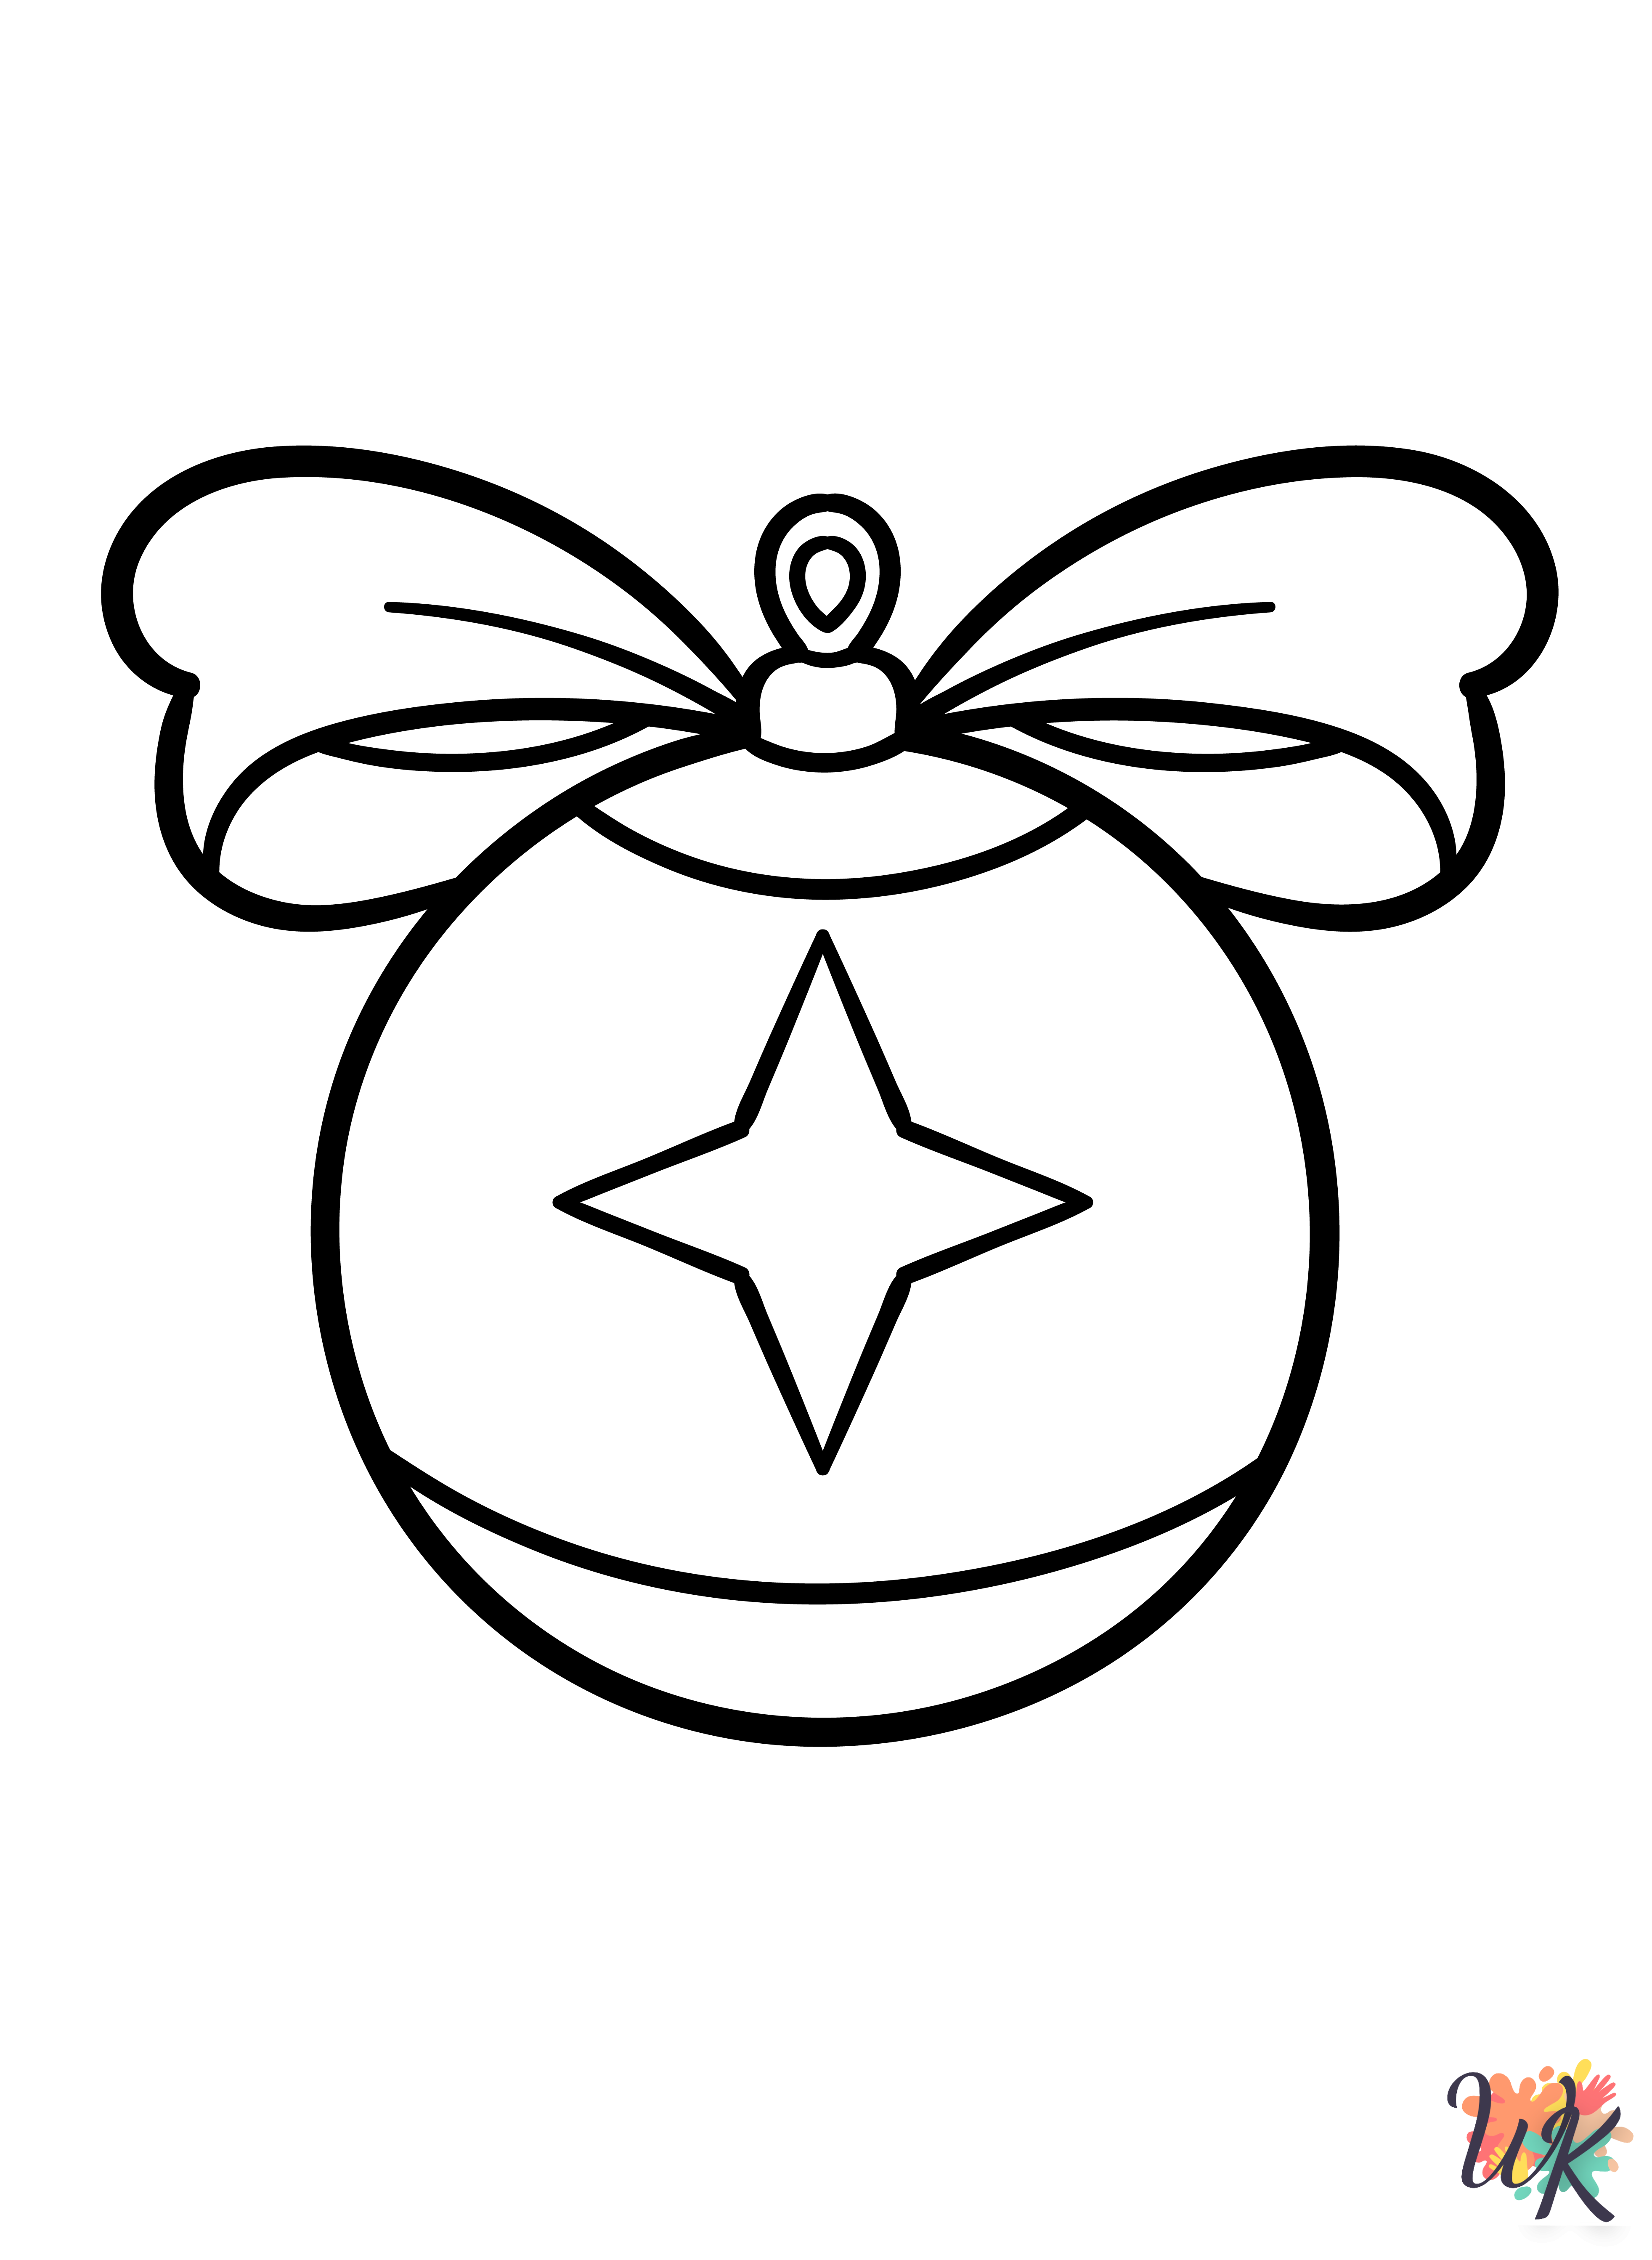 Christmas Ornament coloring pages for adults pdf 1